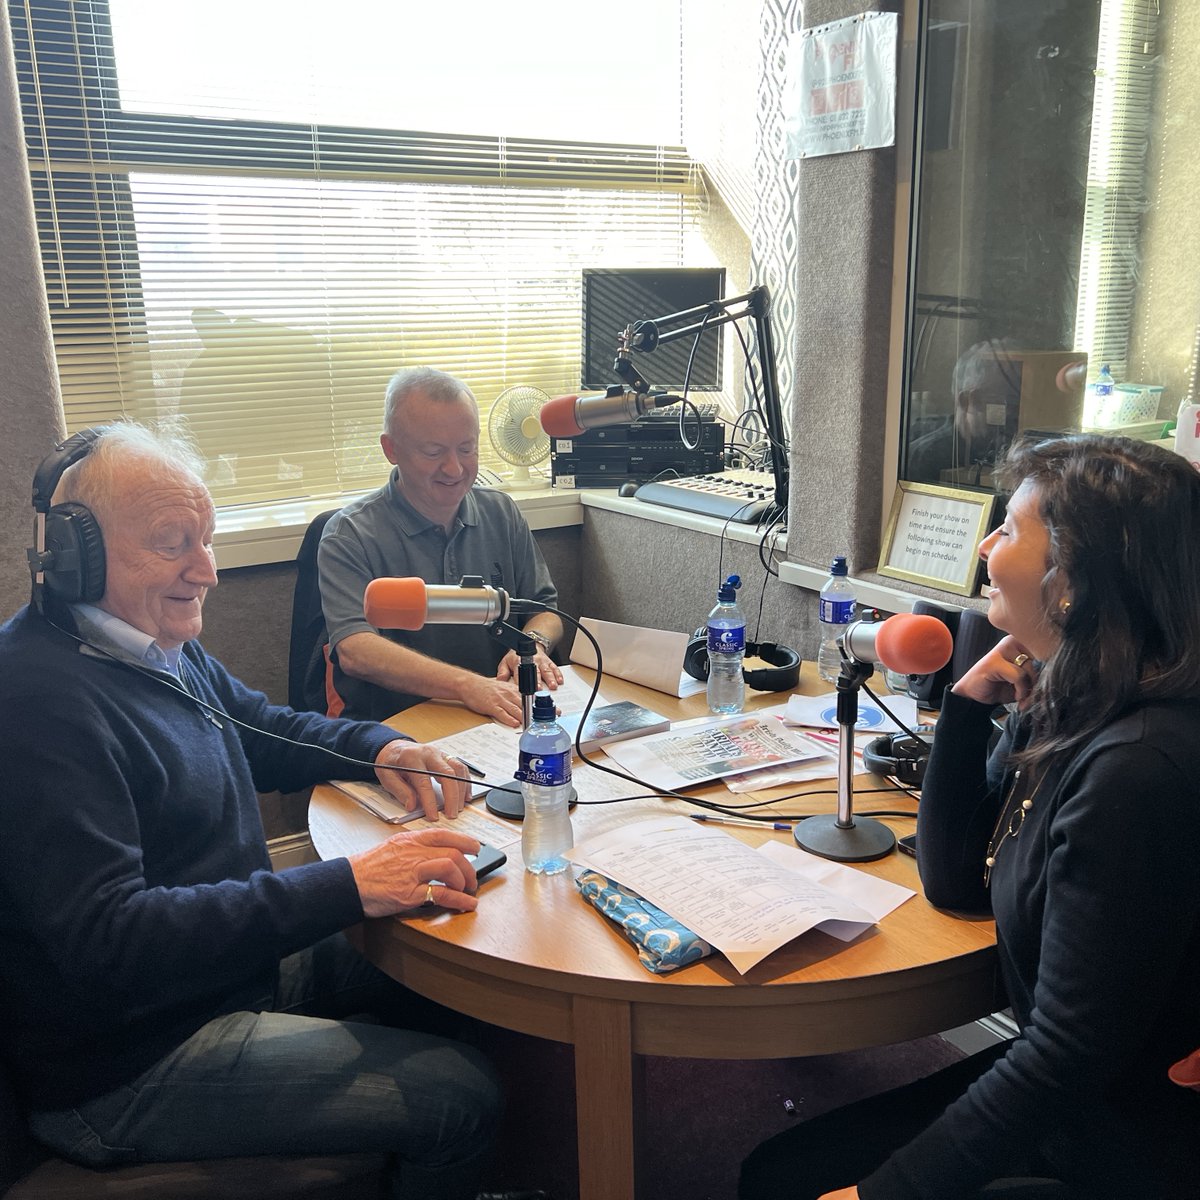 Thank you to all of our guests for joining Roba and Liam this morning: - @greenparty_ie Cllr @JanetPHorner - Talita Holzer at @OpenDoorsToWork - Kieran Fagan - Jimmy Somers Jr You can listen back to Phoenix Live Saturday at mixcloud.com/925PhoenixFM/p….